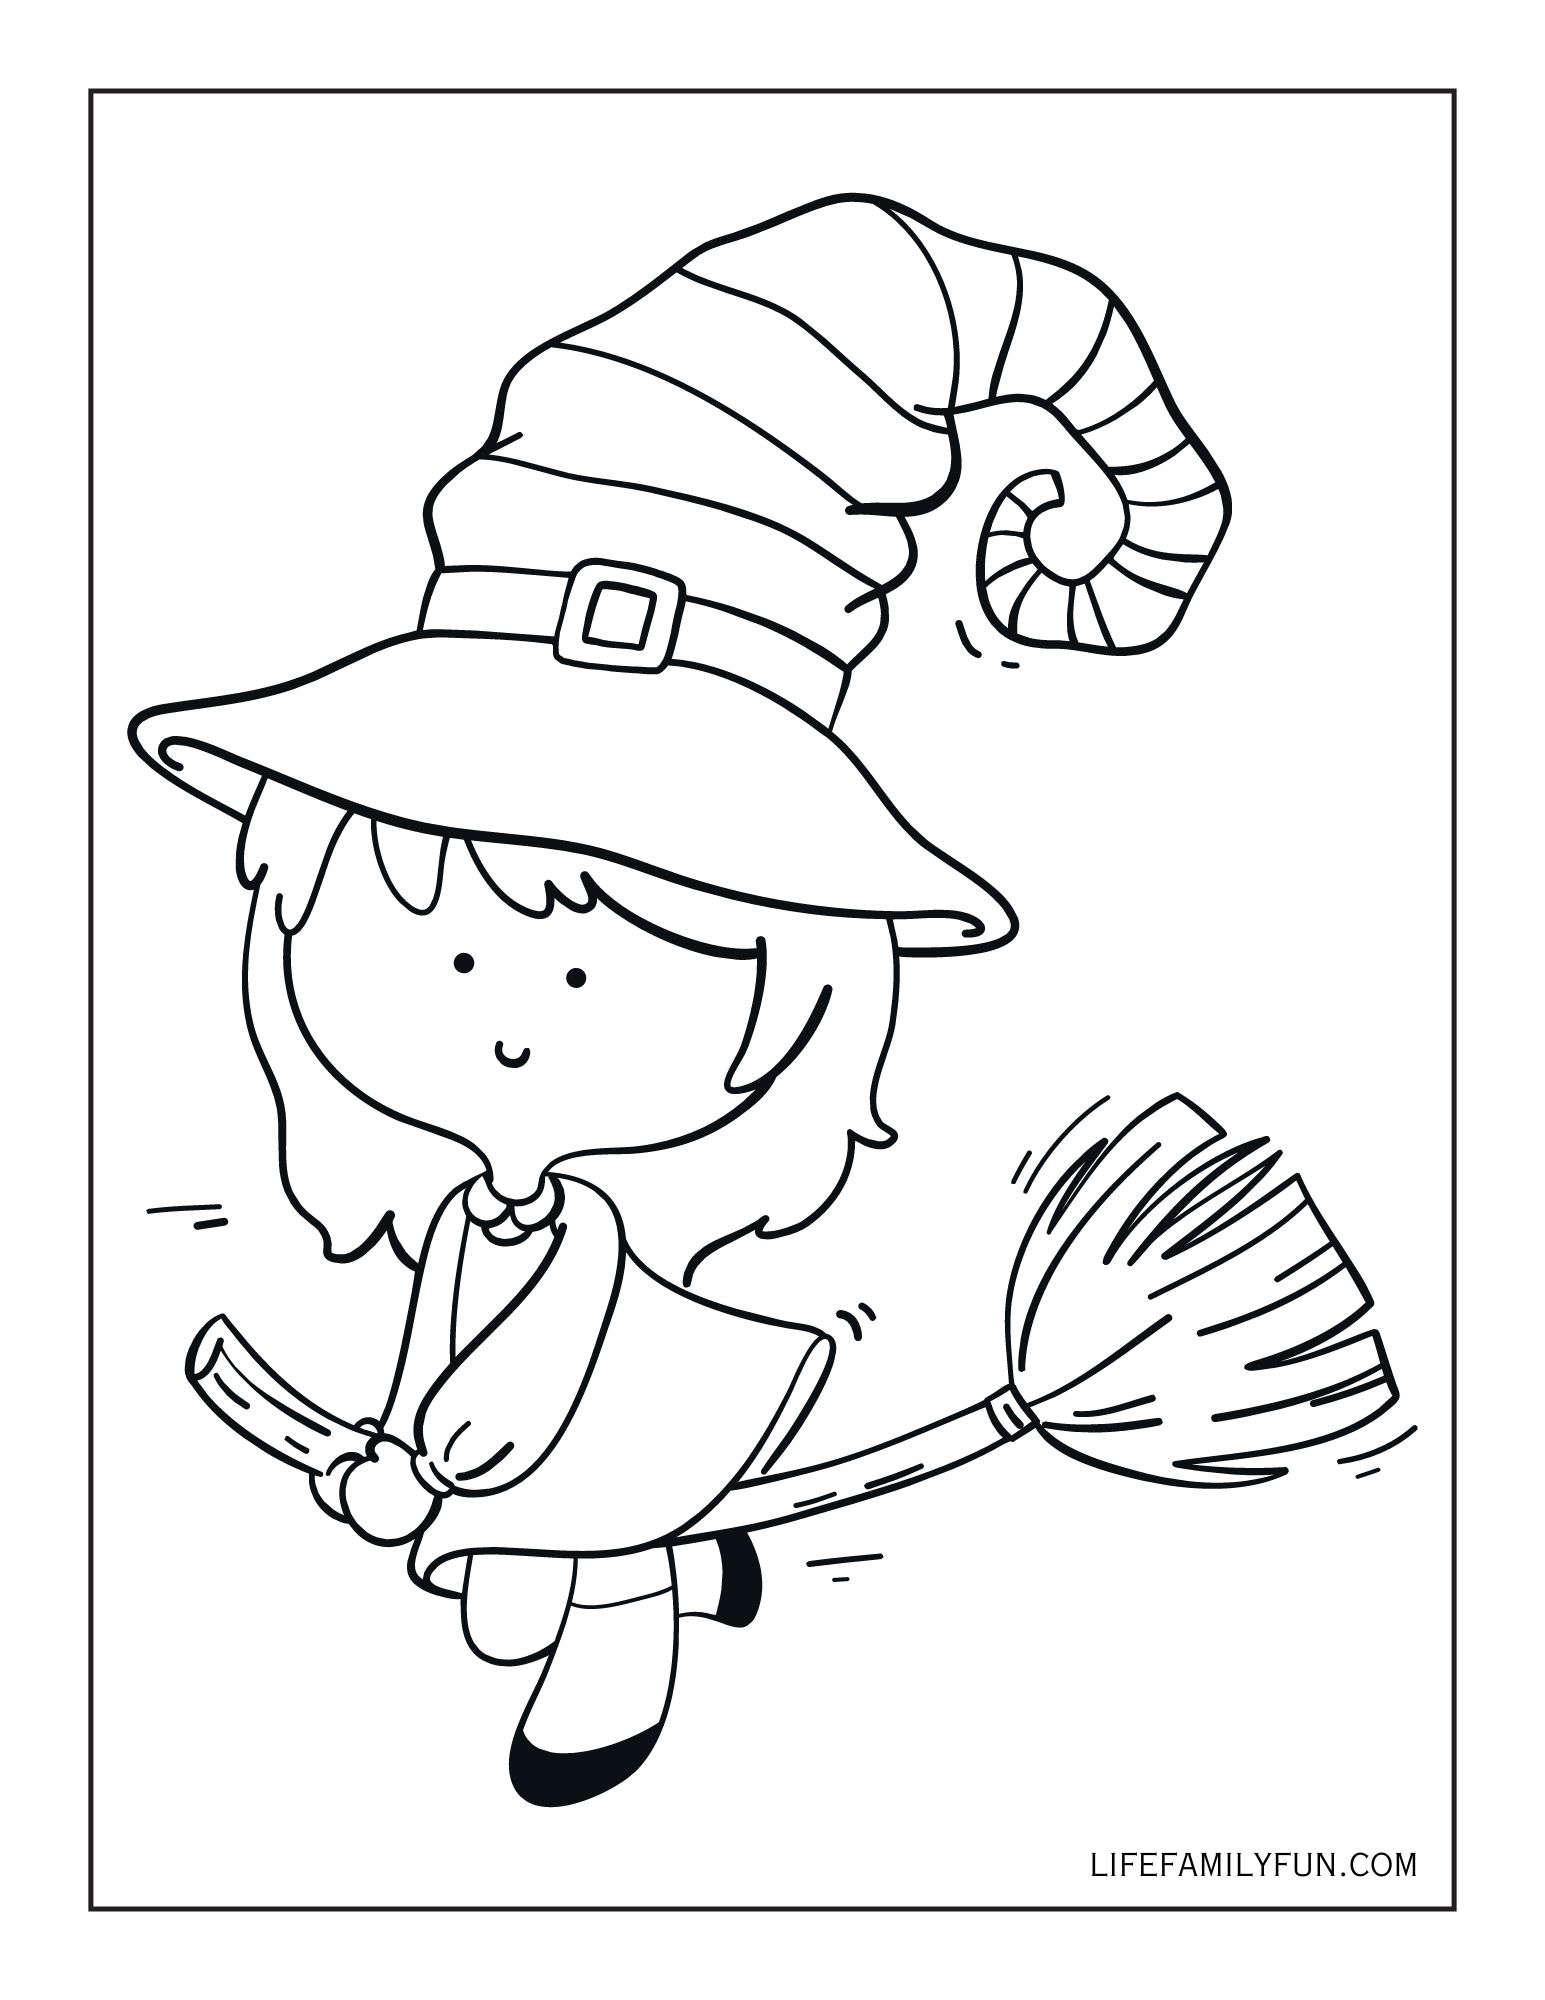 Halloween boy with pumpkin head coloring page